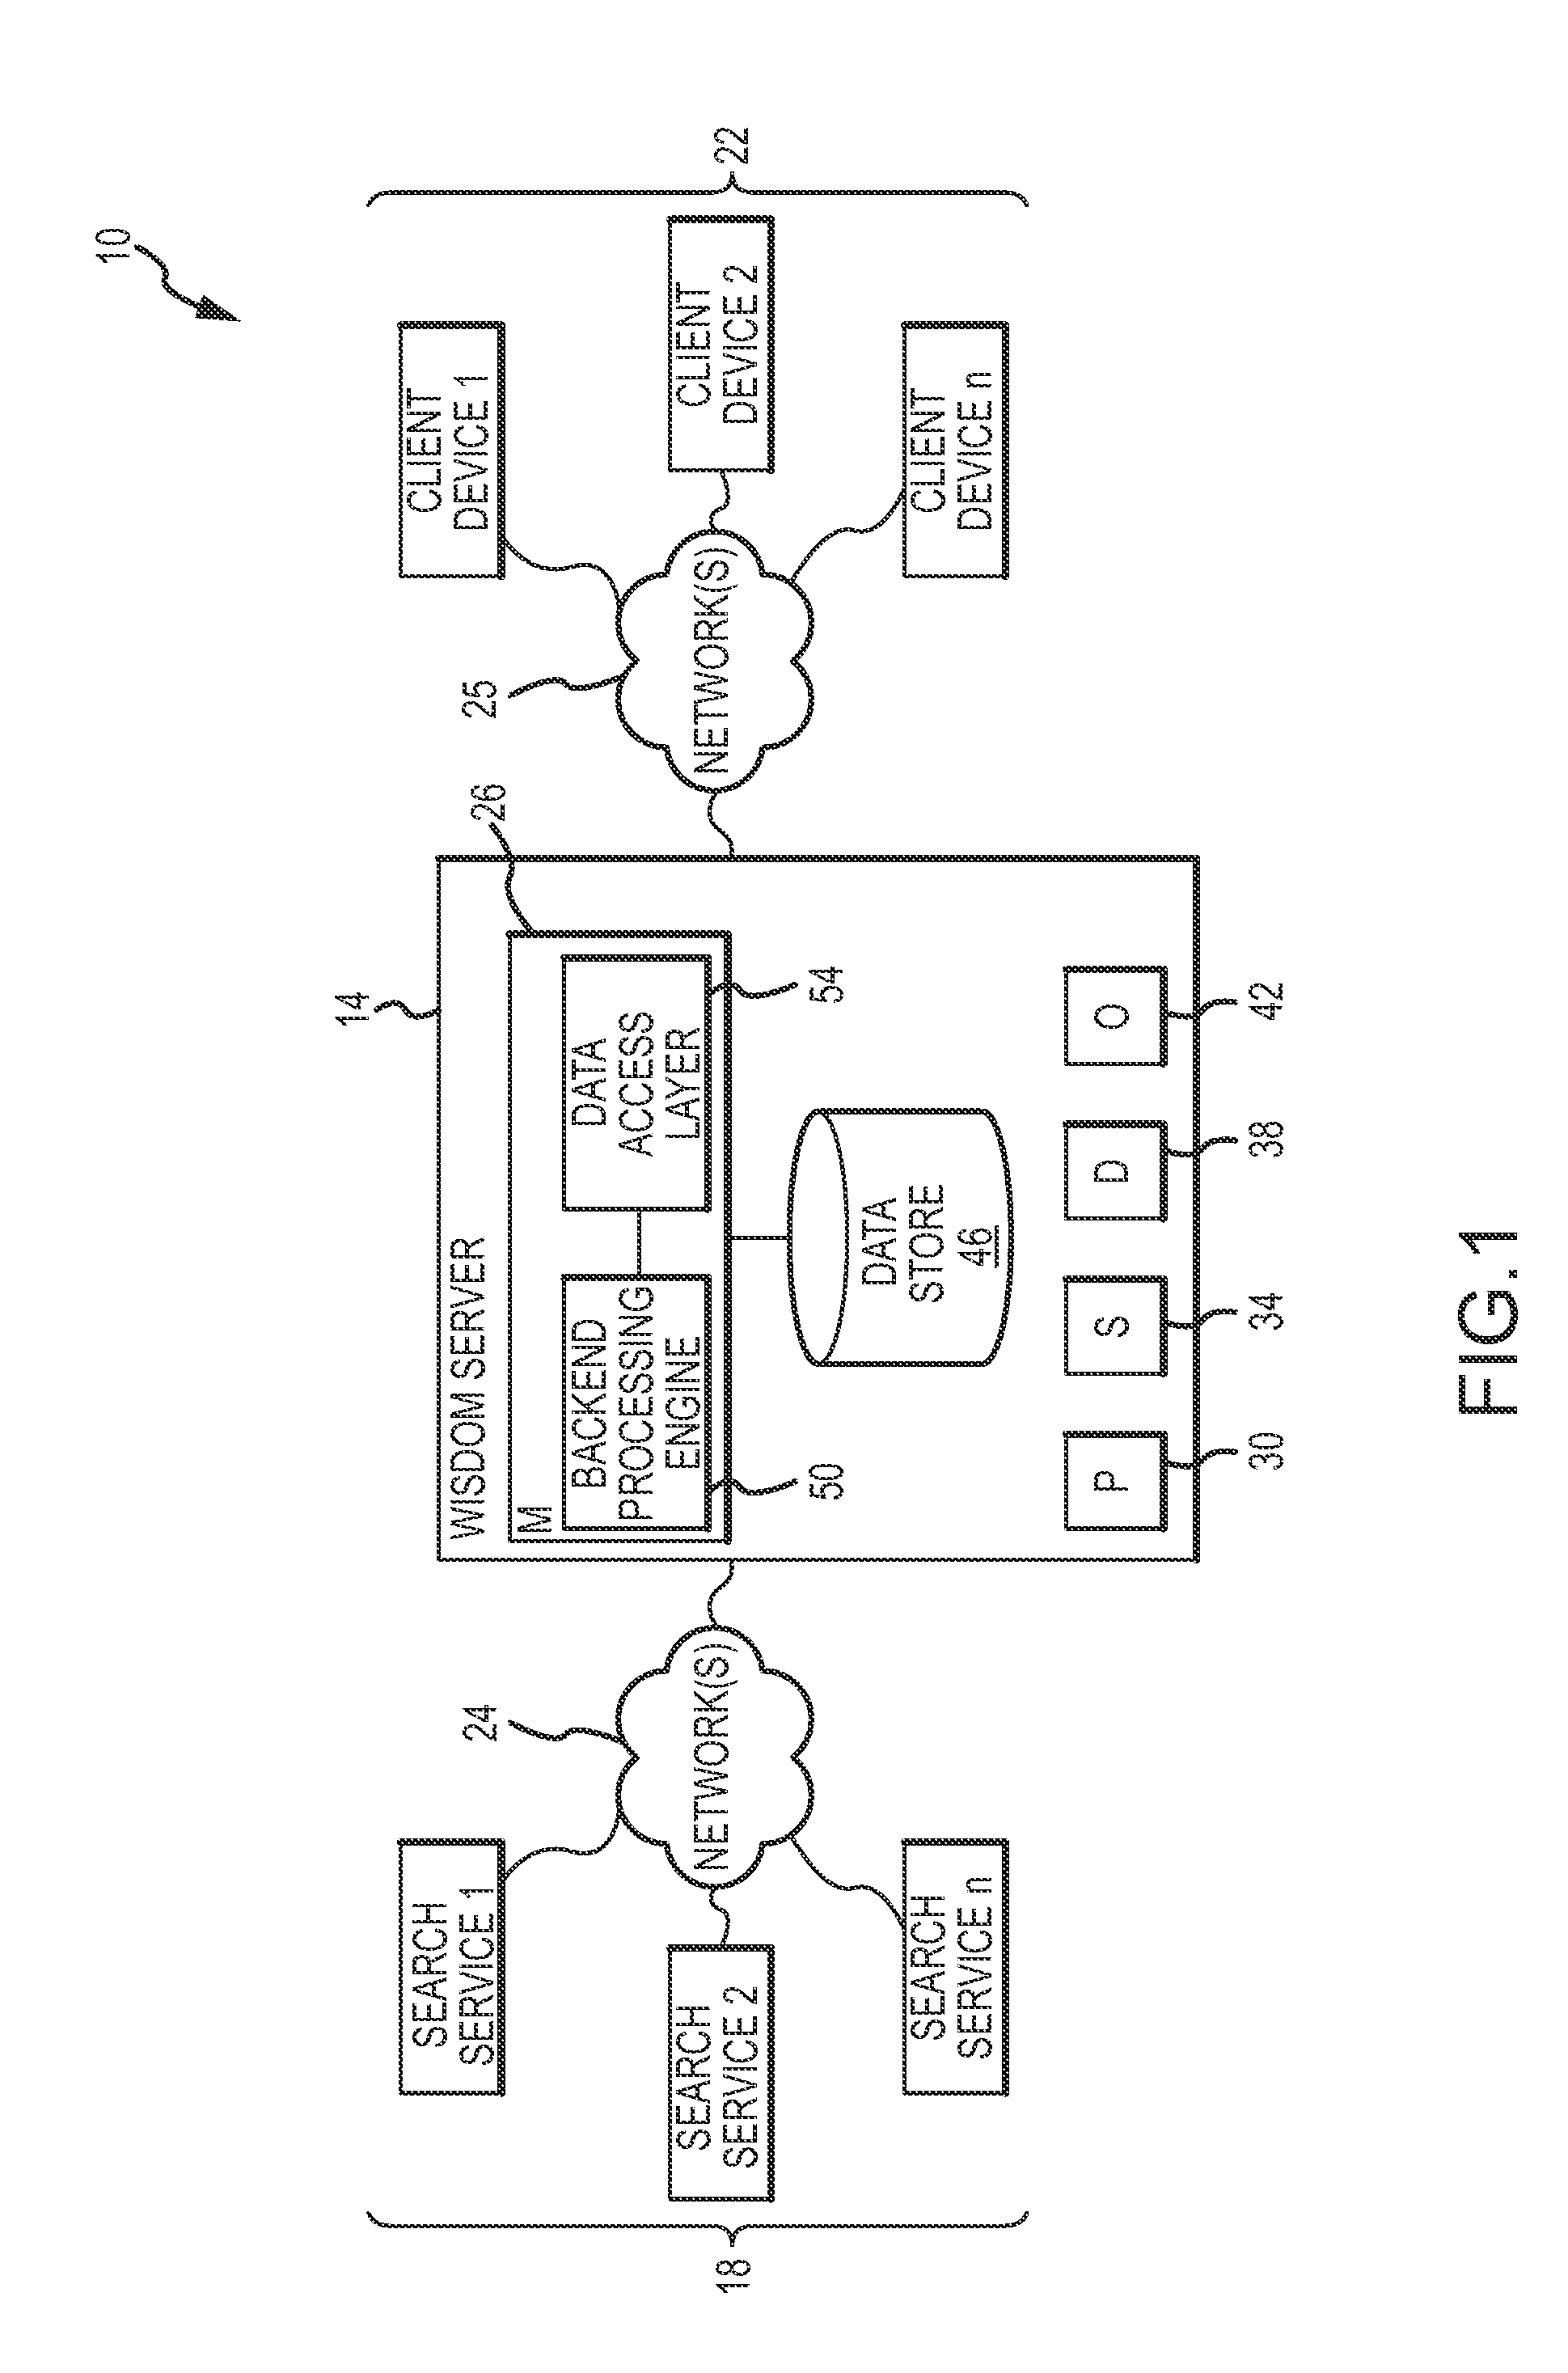 Systems and methods for facilitating the gathering of open source intelligence